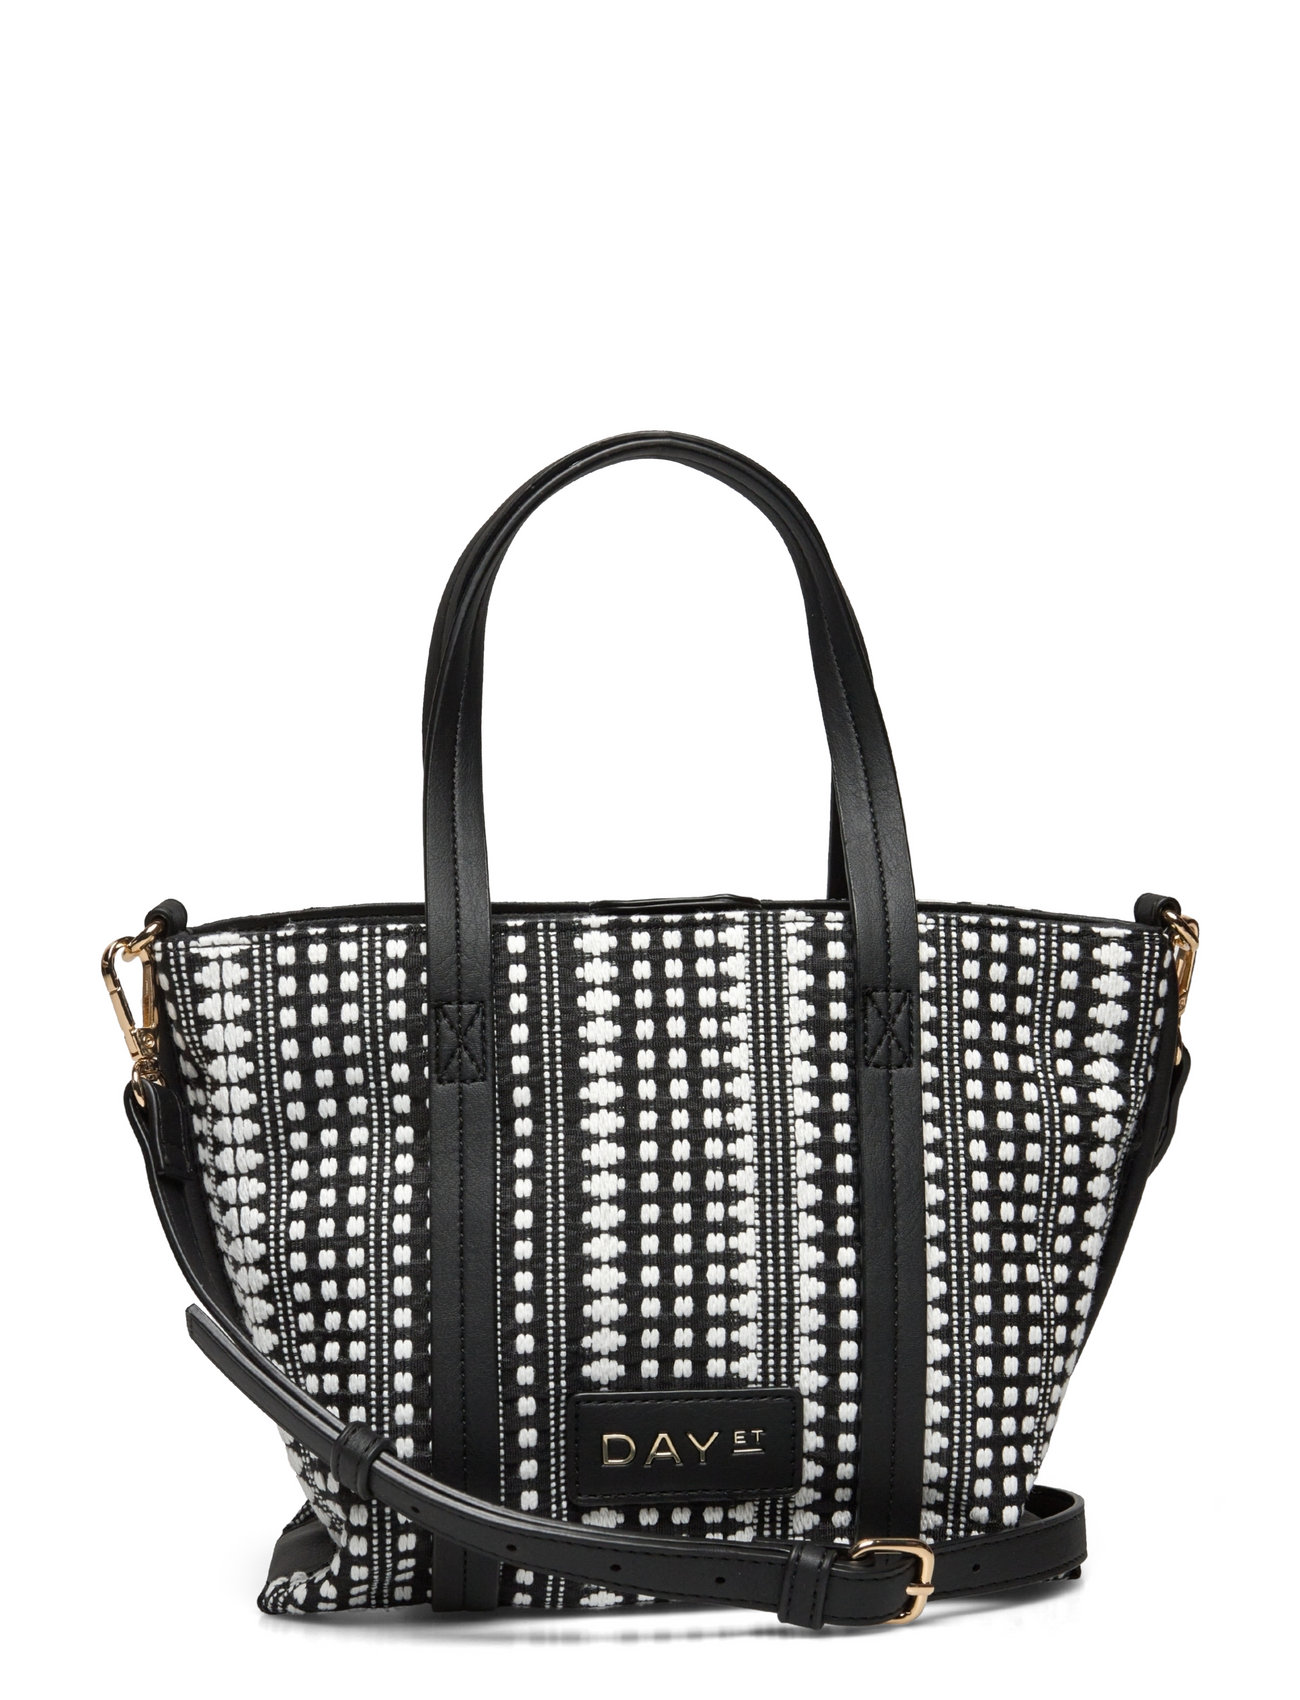 GUESS Abey Quilted Pebble Small Hobo Handbag, Black at John Lewis & Partners